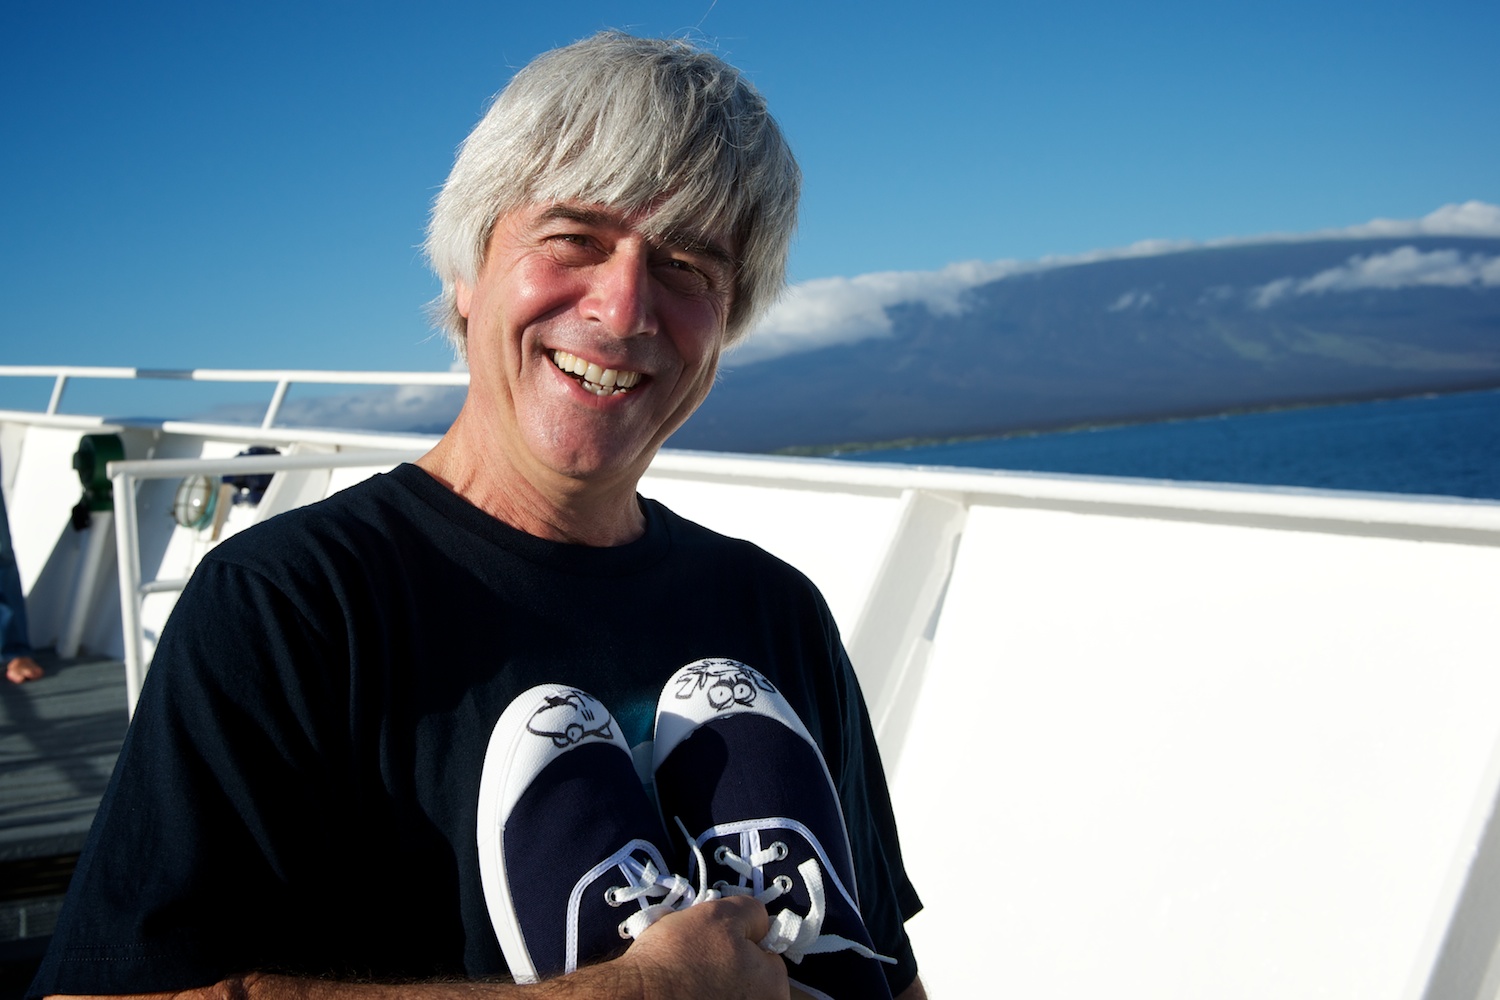 Mike deGruy holds a pair of tennis shoes decorated by Jim Toomey of "Sherman's Lagoon," aboard the Mission Blue Voyage to the Galápagos. Courtesy James Duncan Davidson.